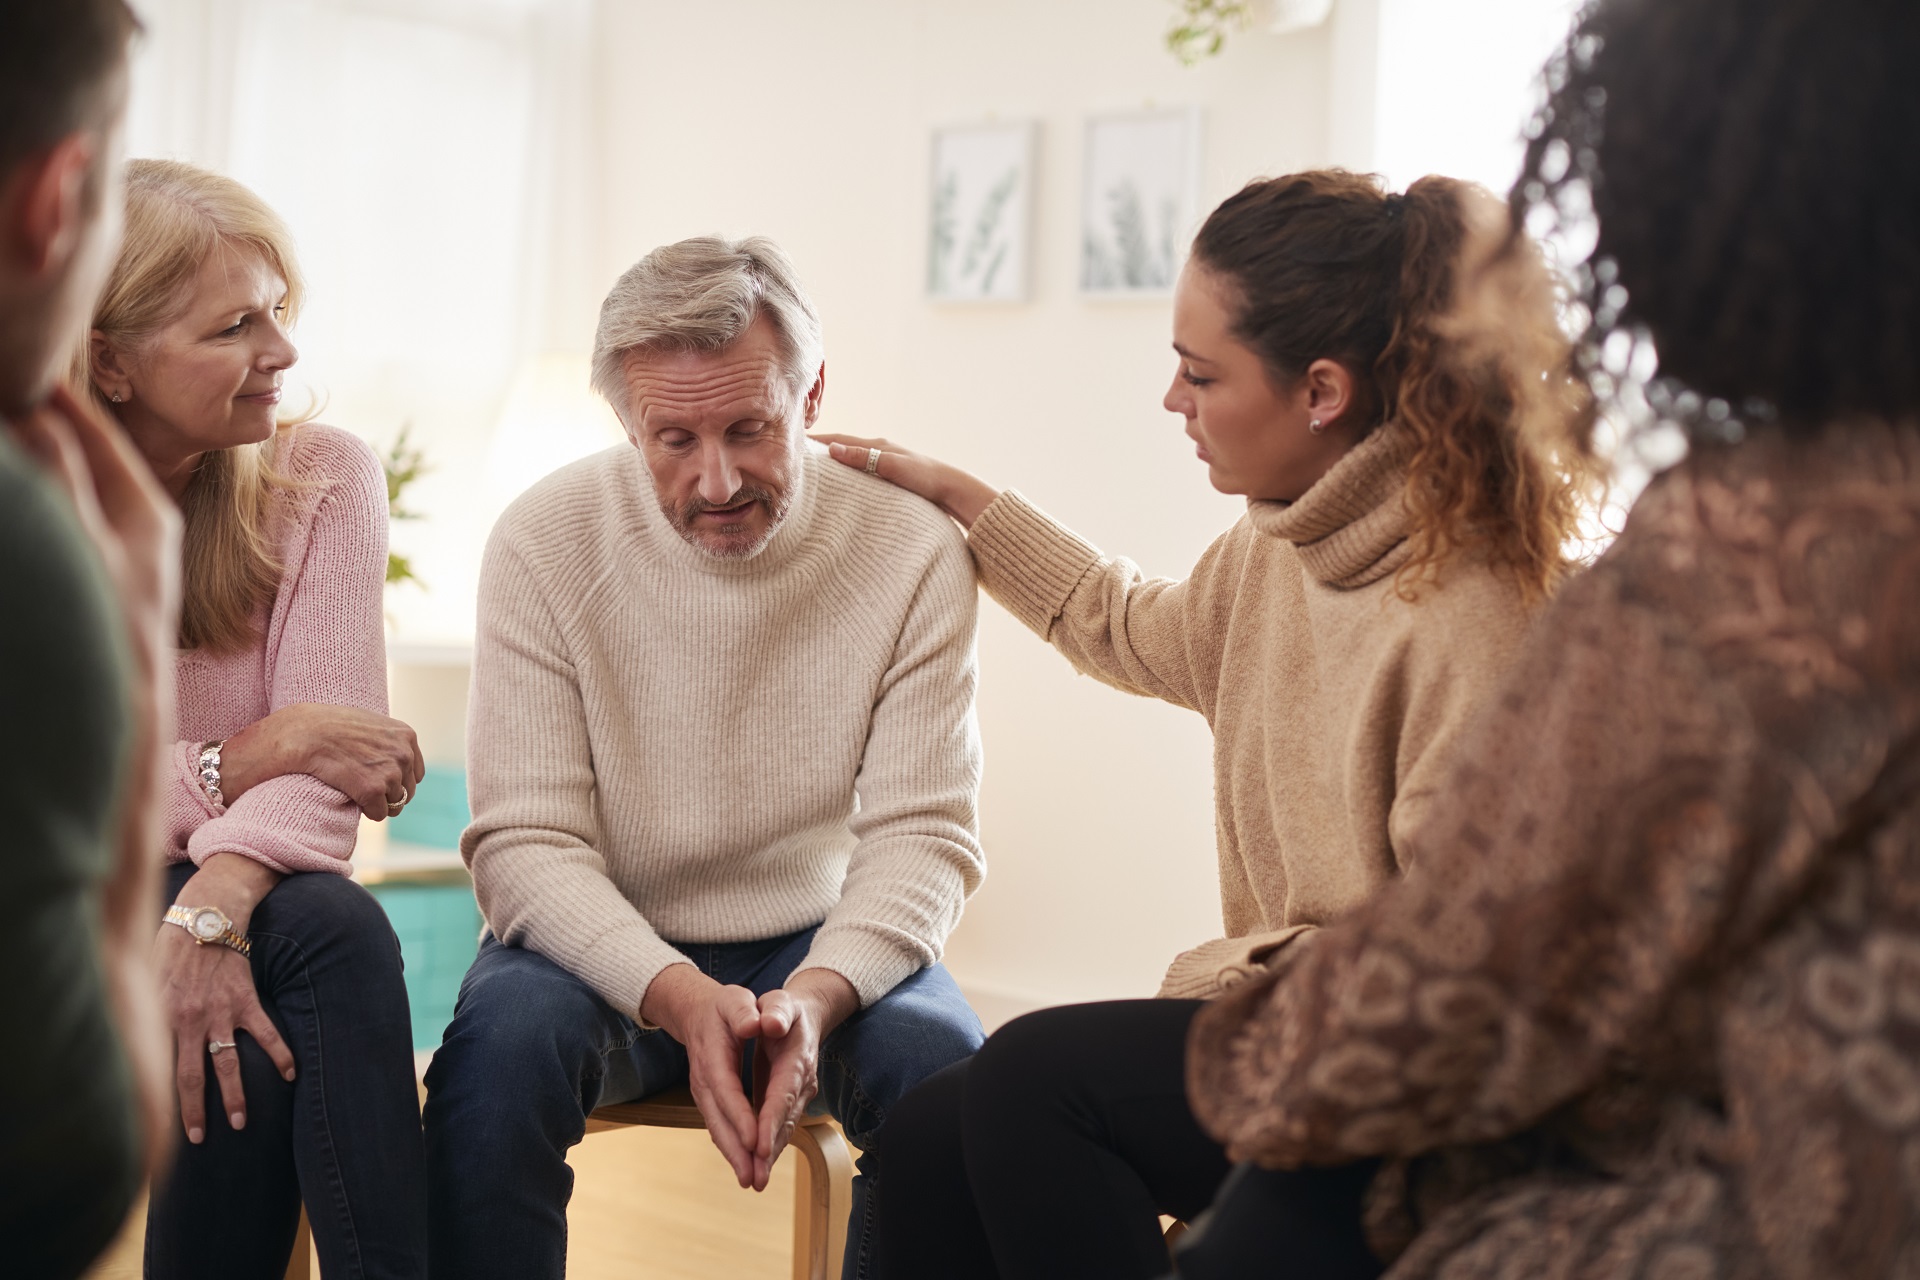 Group Consoling Man Speaking At Support Group Meeting For Mental Health Or Dependency Issues